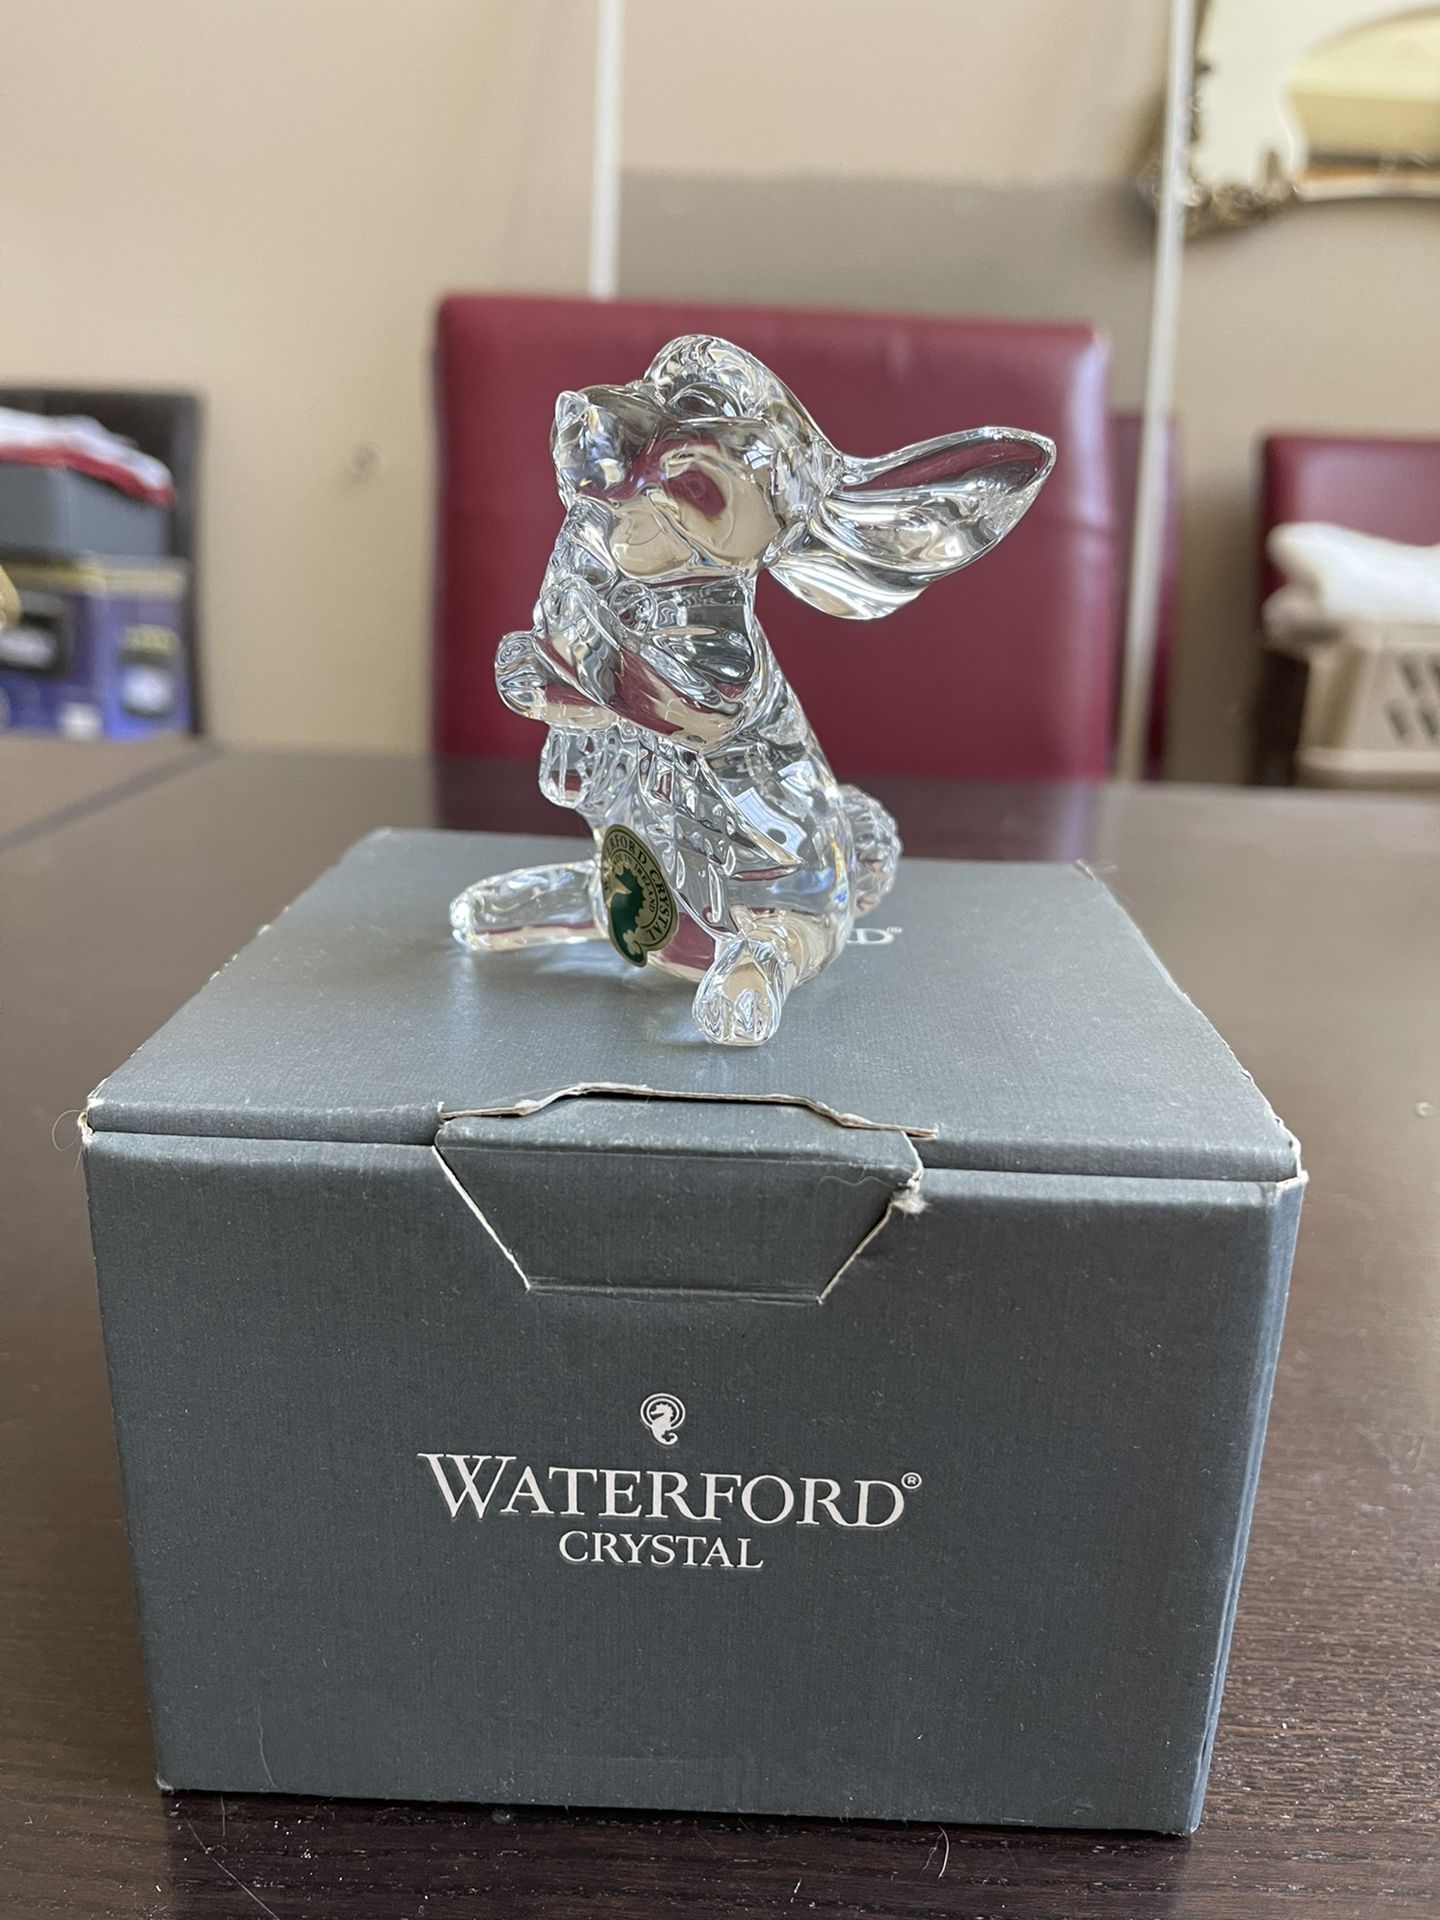 Waterford Crystal Rabbit Just In Time For Easter!